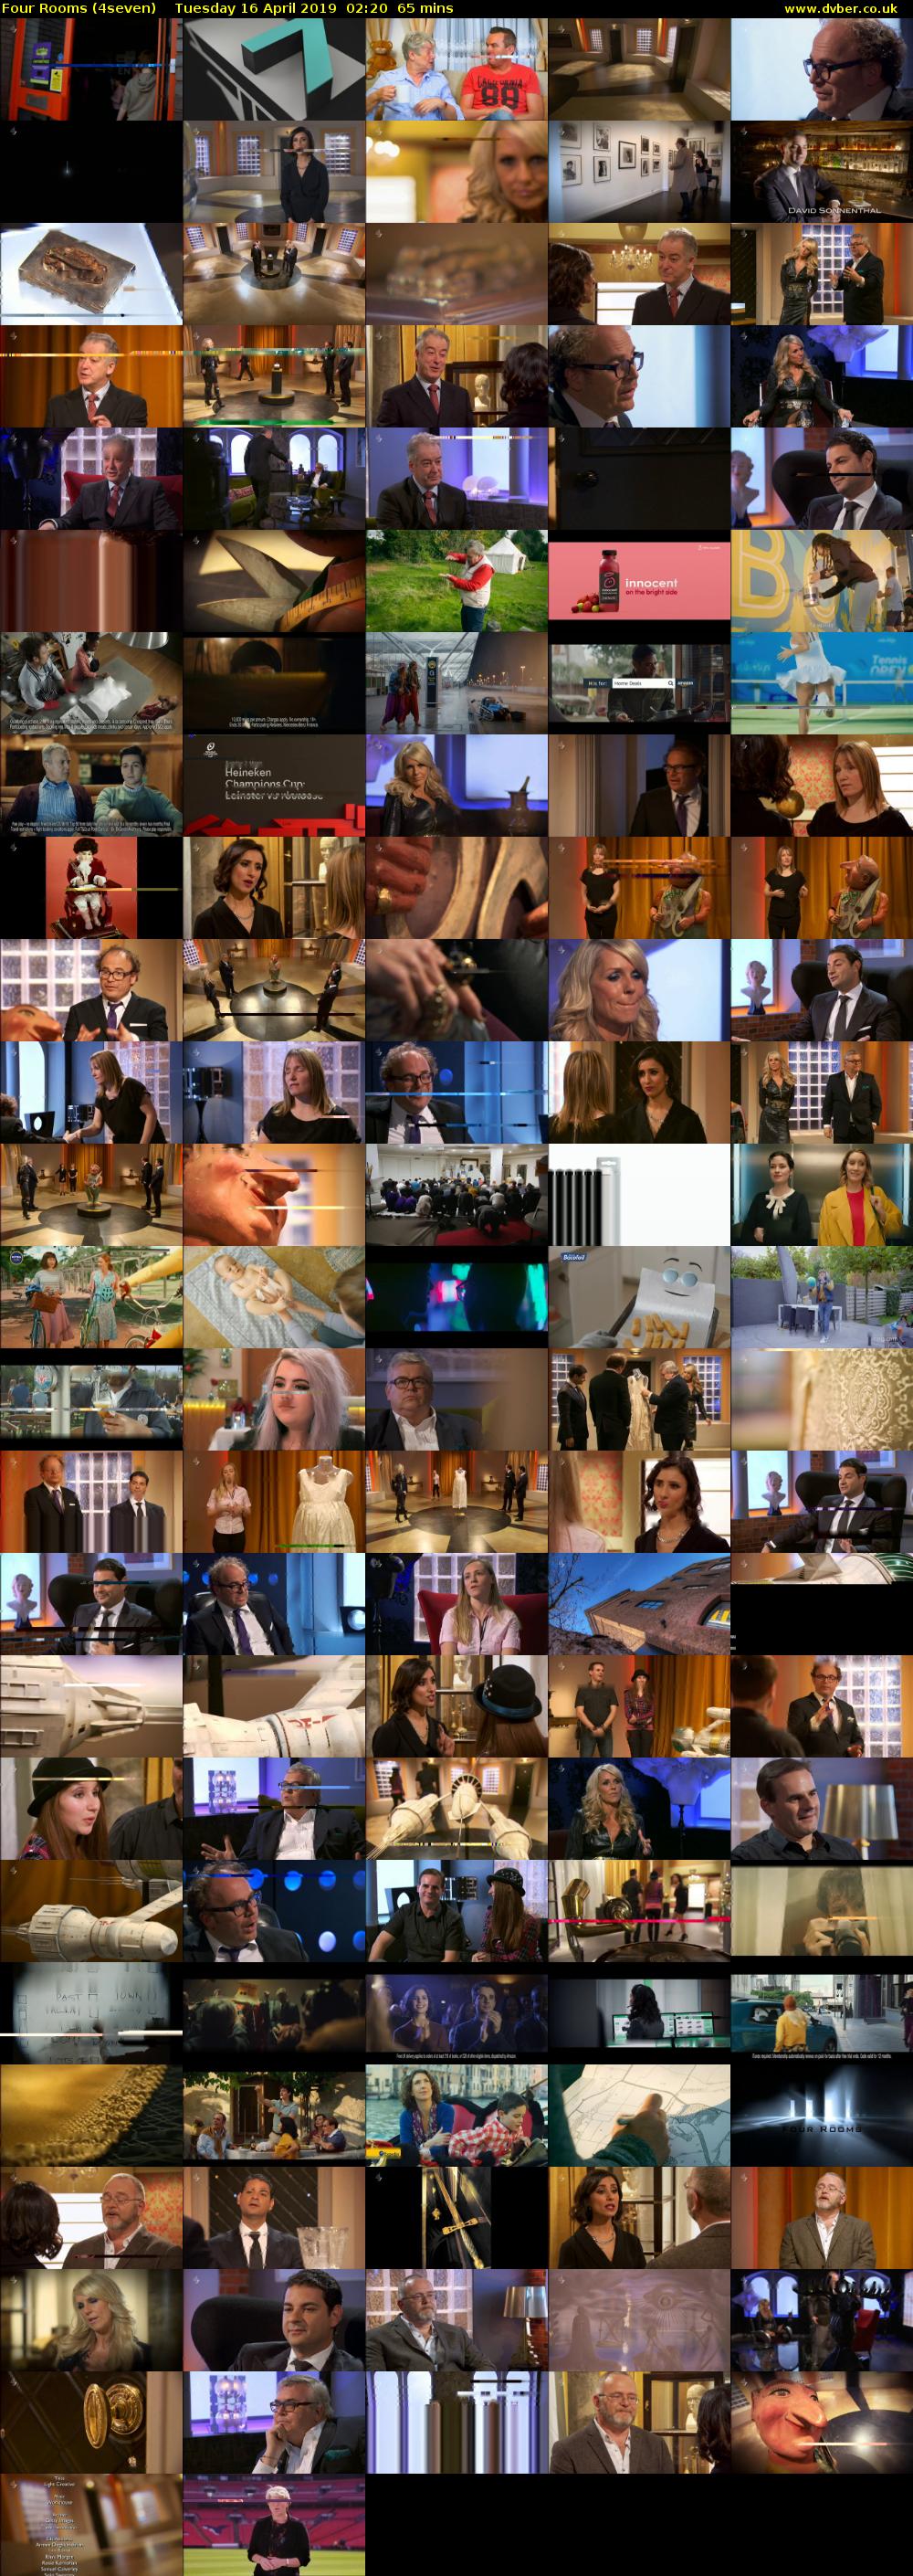 Four Rooms (4seven) Tuesday 16 April 2019 02:20 - 03:25